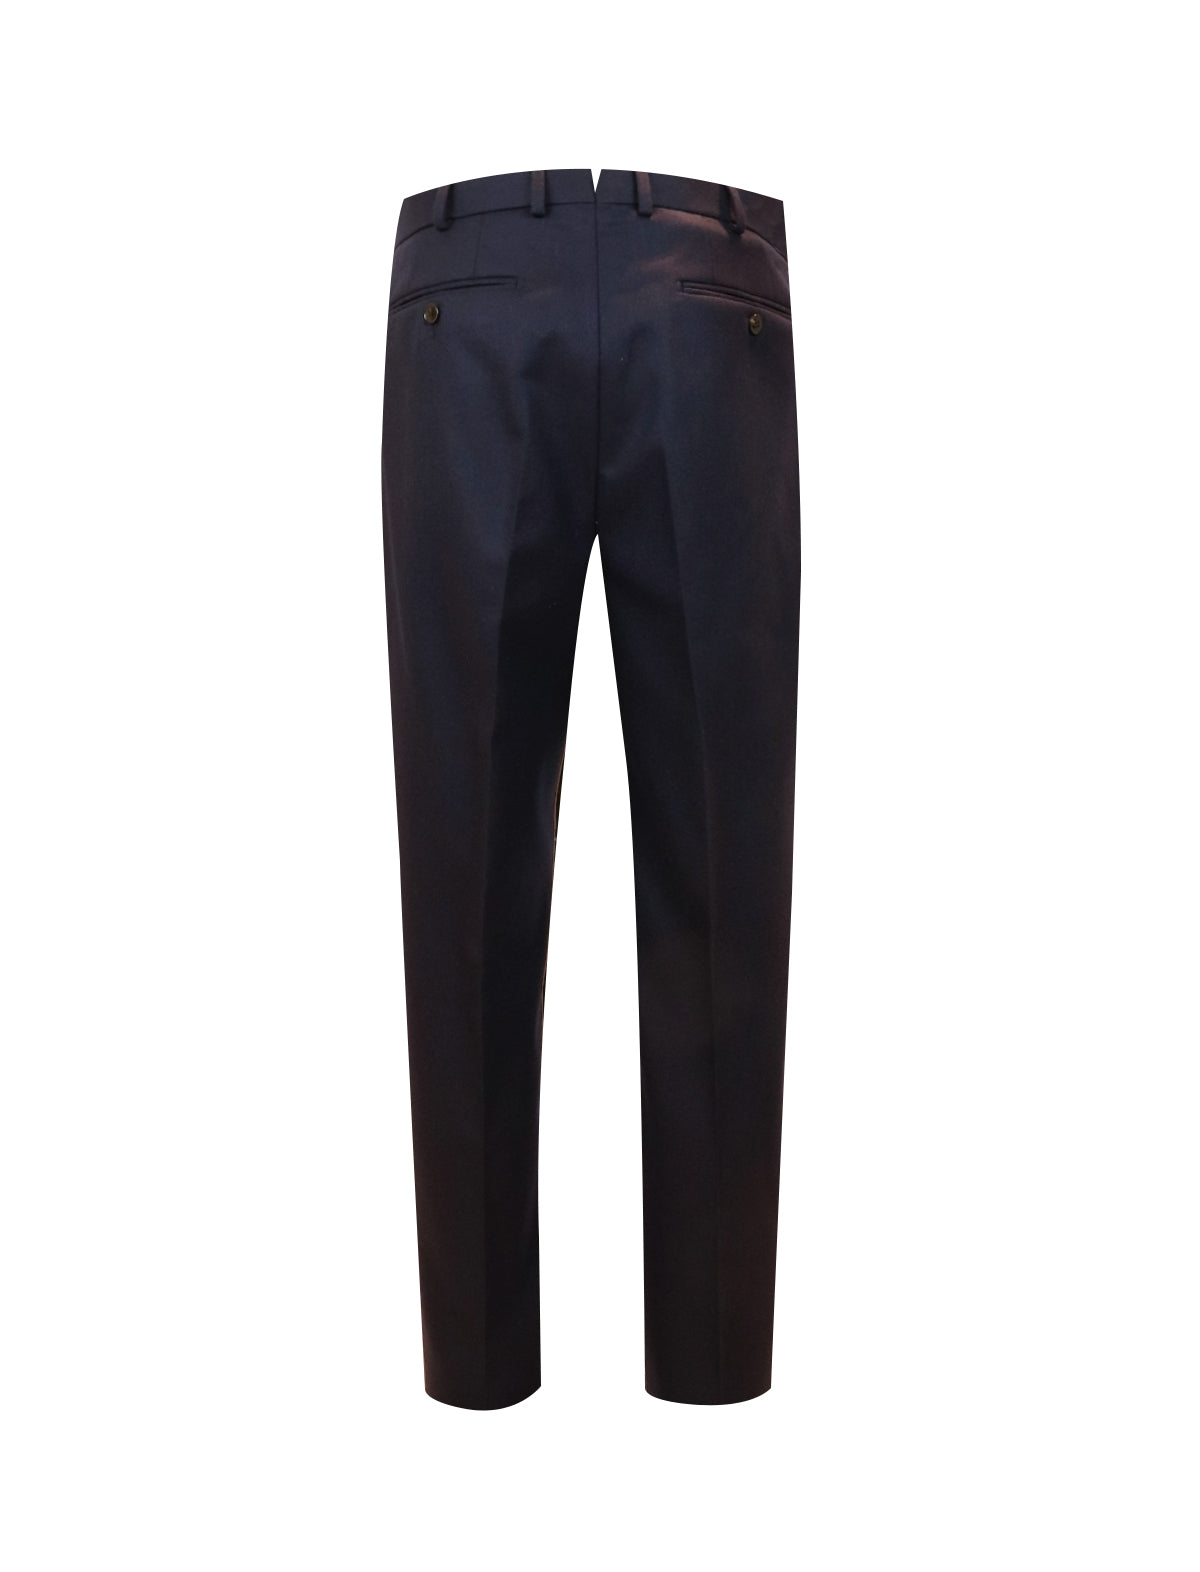 GABRIELE PASINI Pleated Tailored Pant in Navy